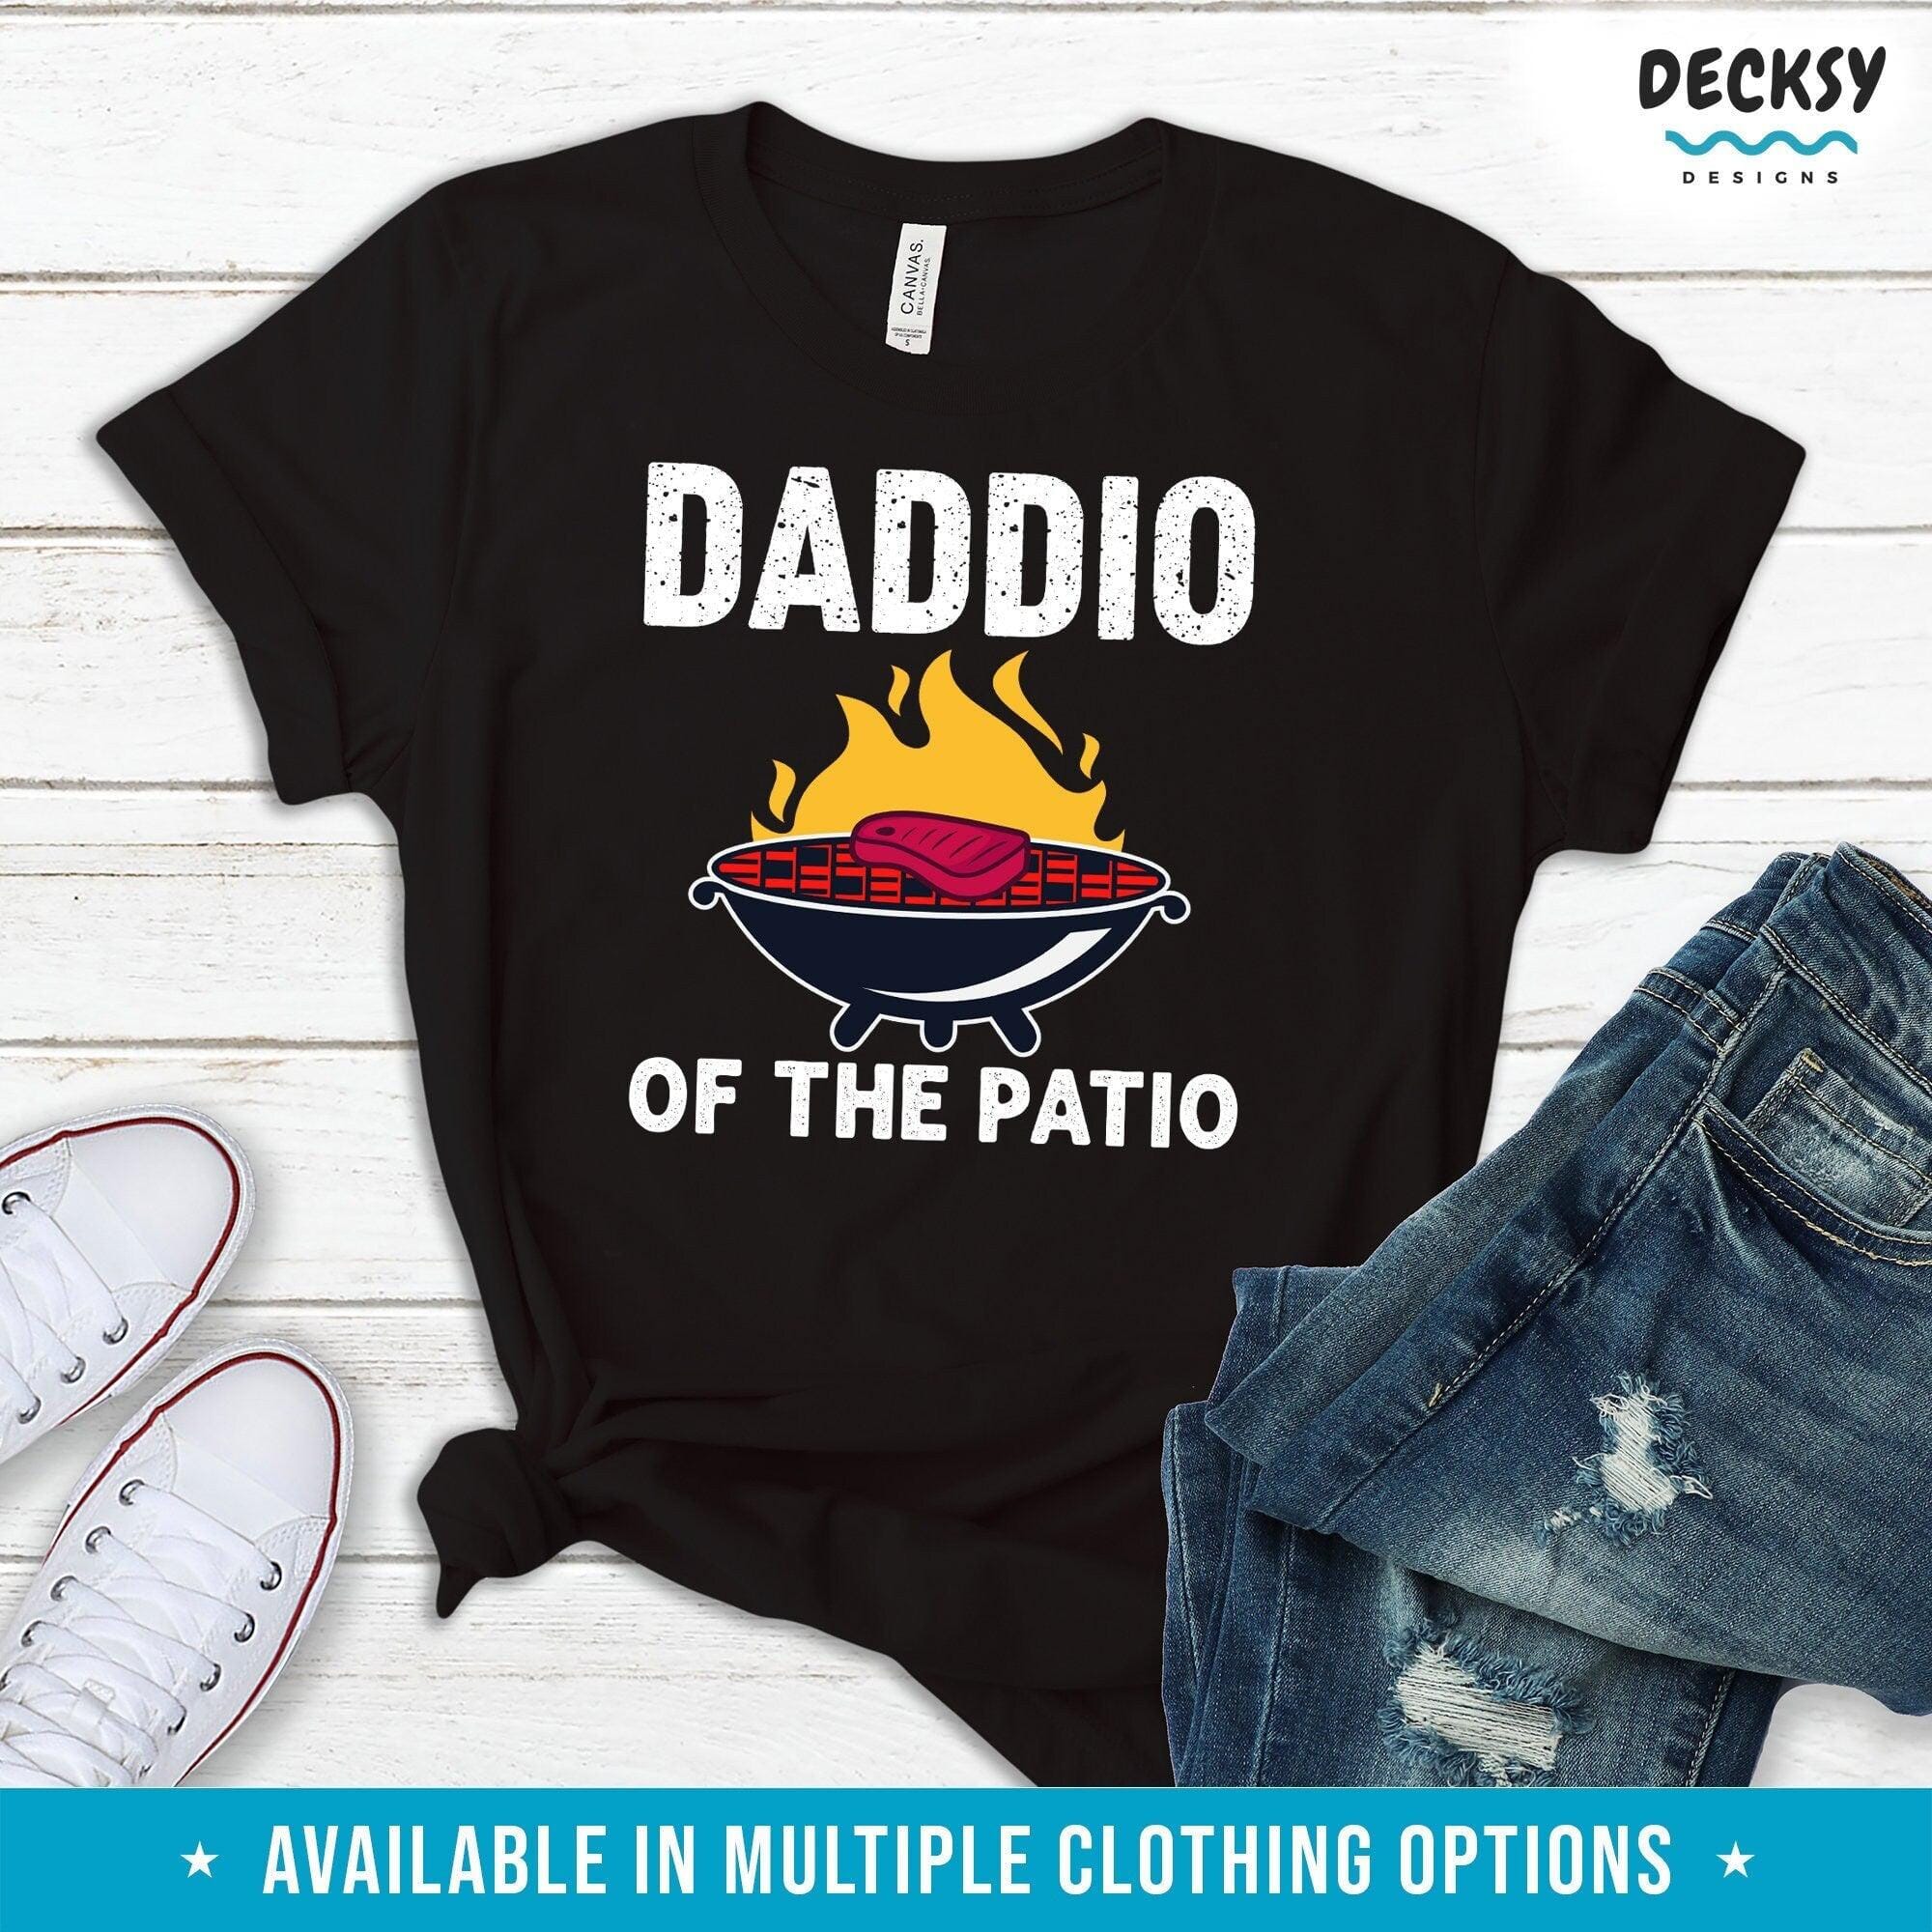 Bbq Dad Shirt, Barbecue Gifts Men-Clothing:Gender-Neutral Adult Clothing:Tops & Tees:T-shirts:Graphic Tees-DecksyDesigns